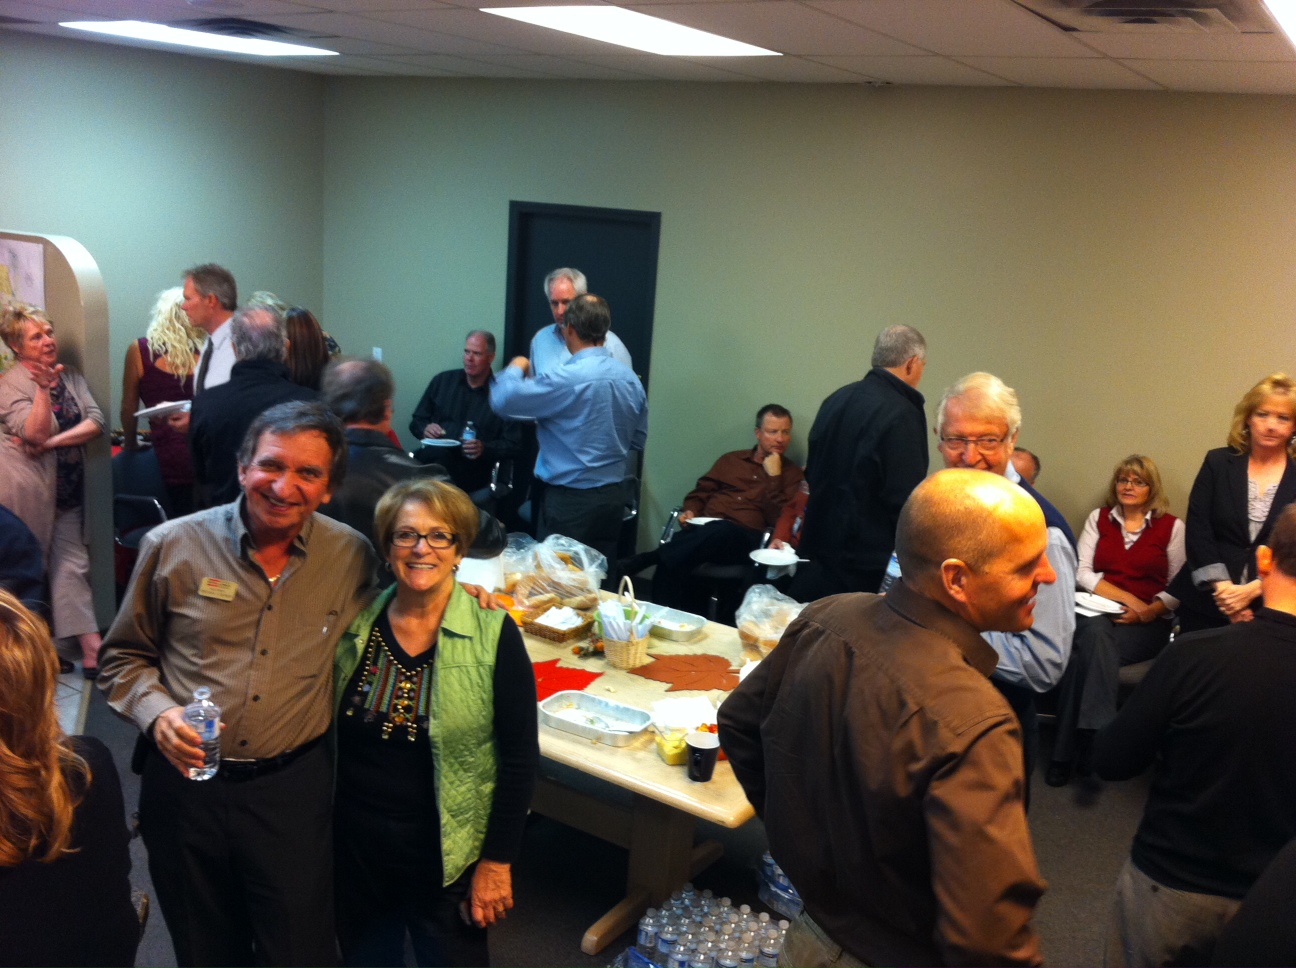 Royal LePage Kelowna: Another fun office luncheon